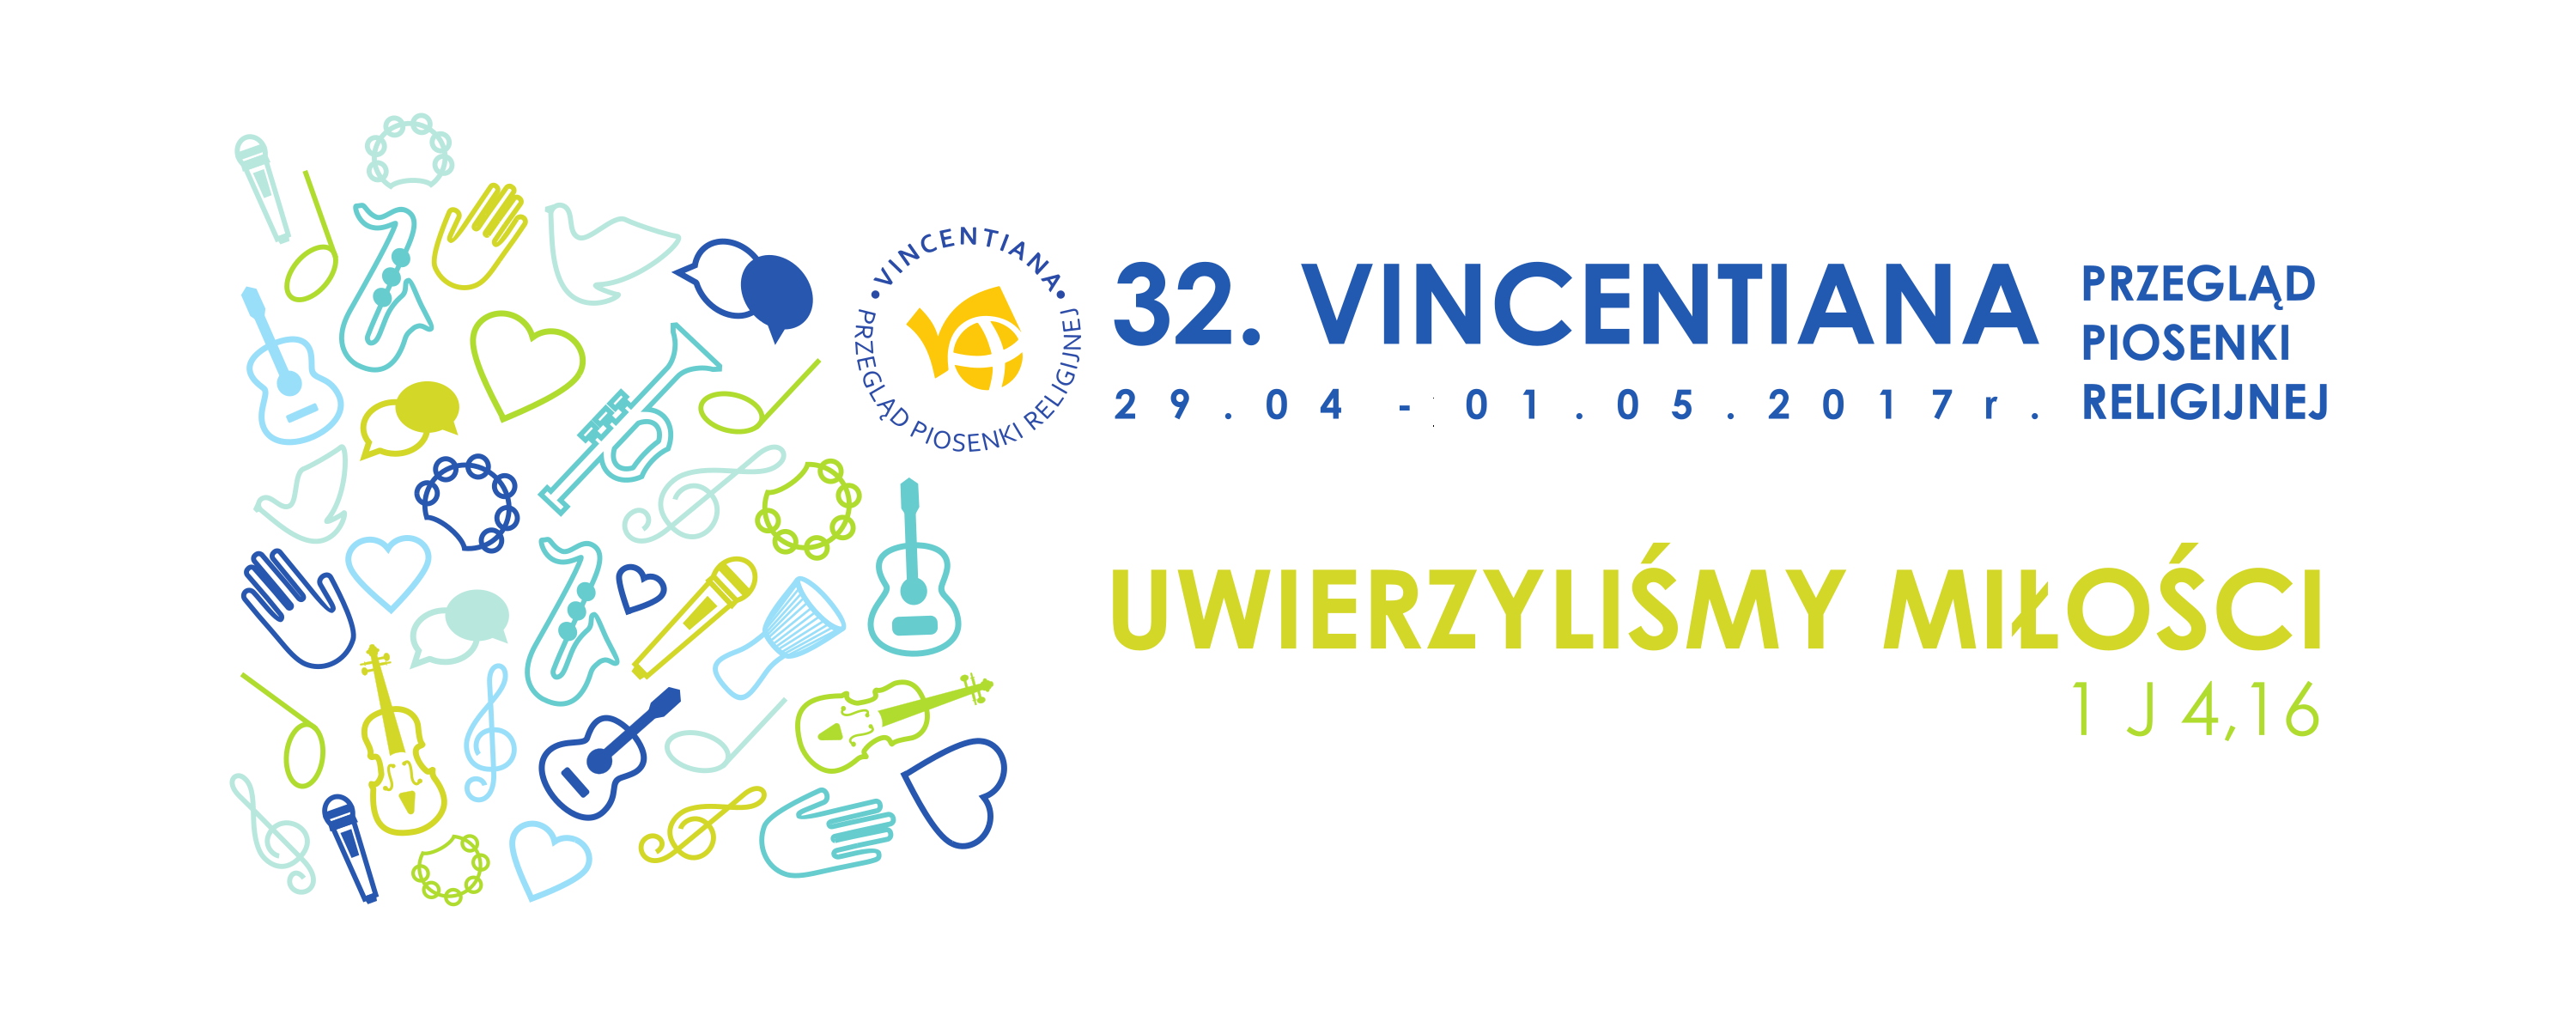 You are currently viewing Vincentiana 2017 w Radio Plus Kraków!